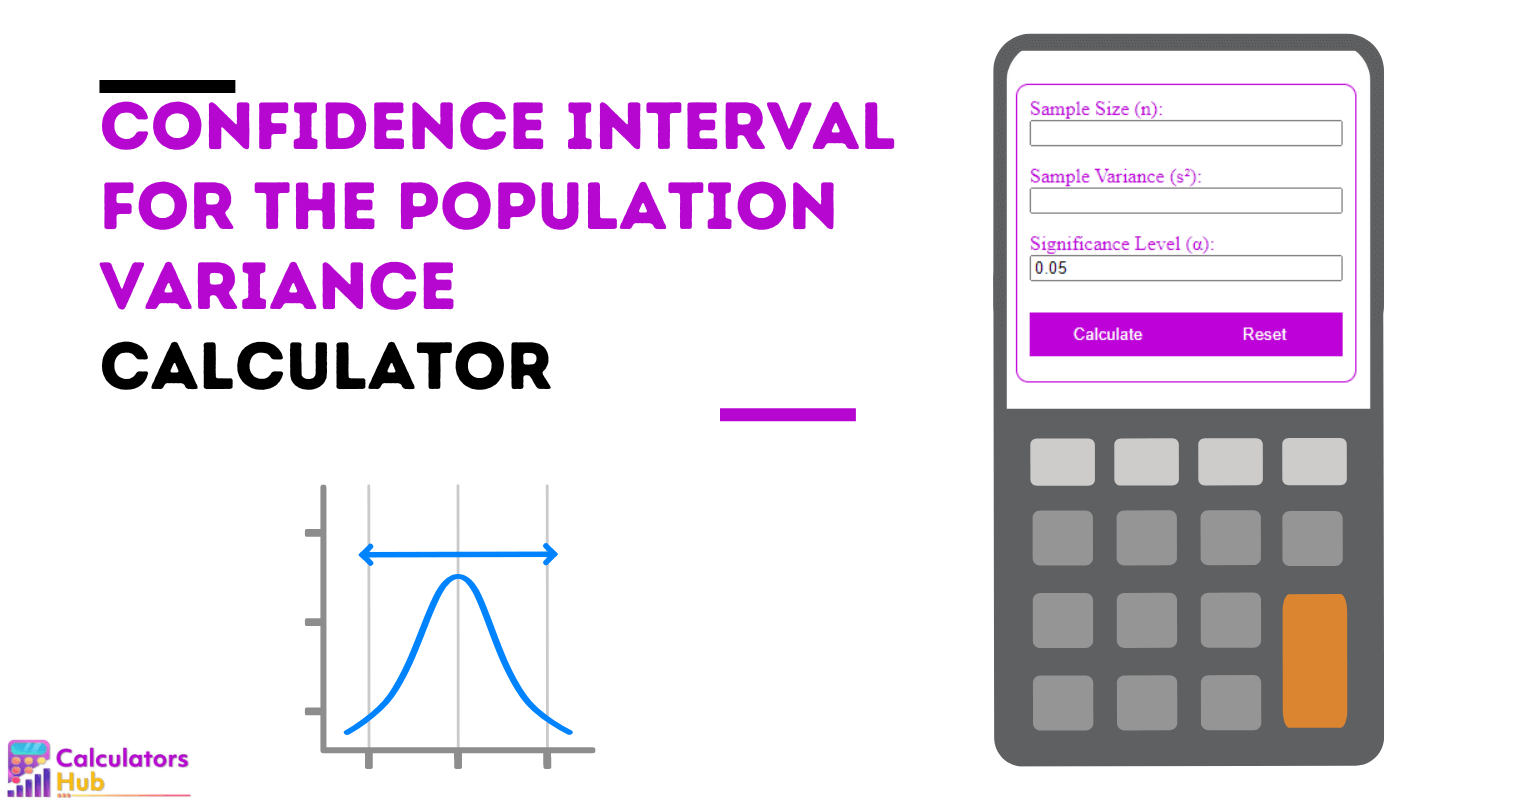 Confidence Interval for the Population Variance Calculator